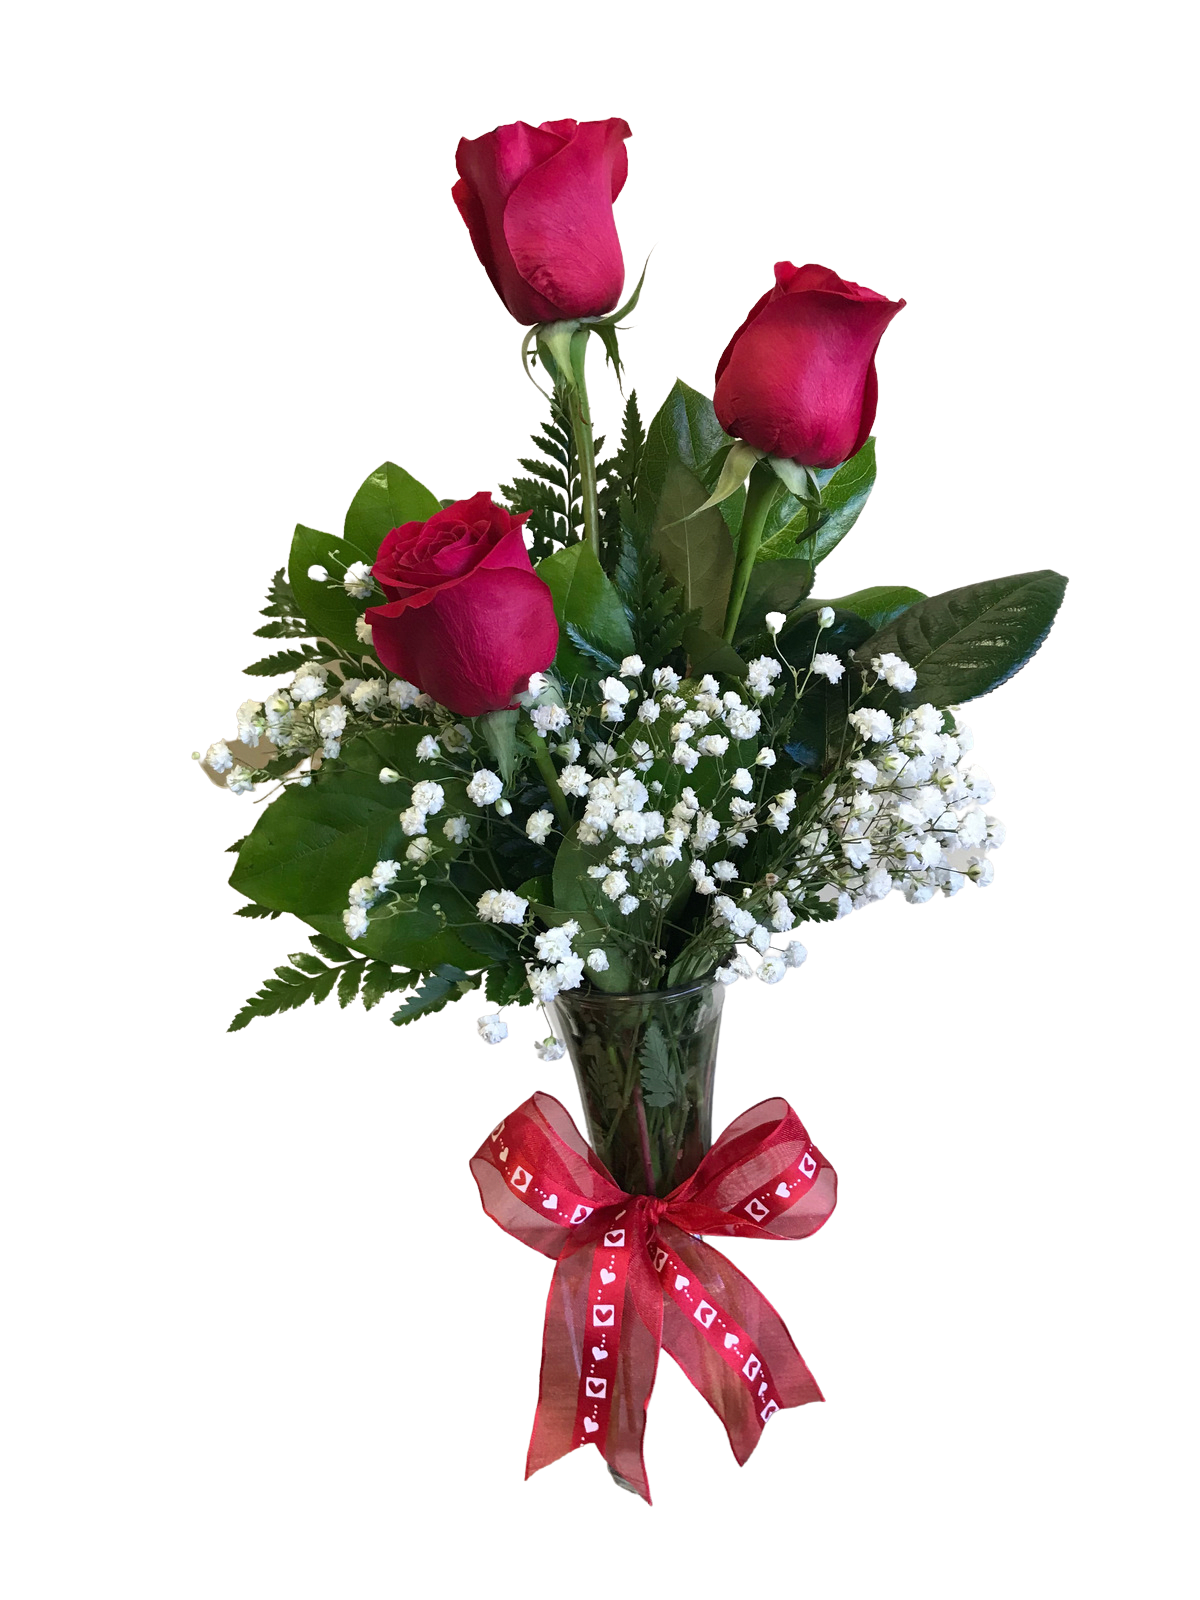 Daddy's Girl - 3 Roses arranged in a glass vase with greenery and filler flowers